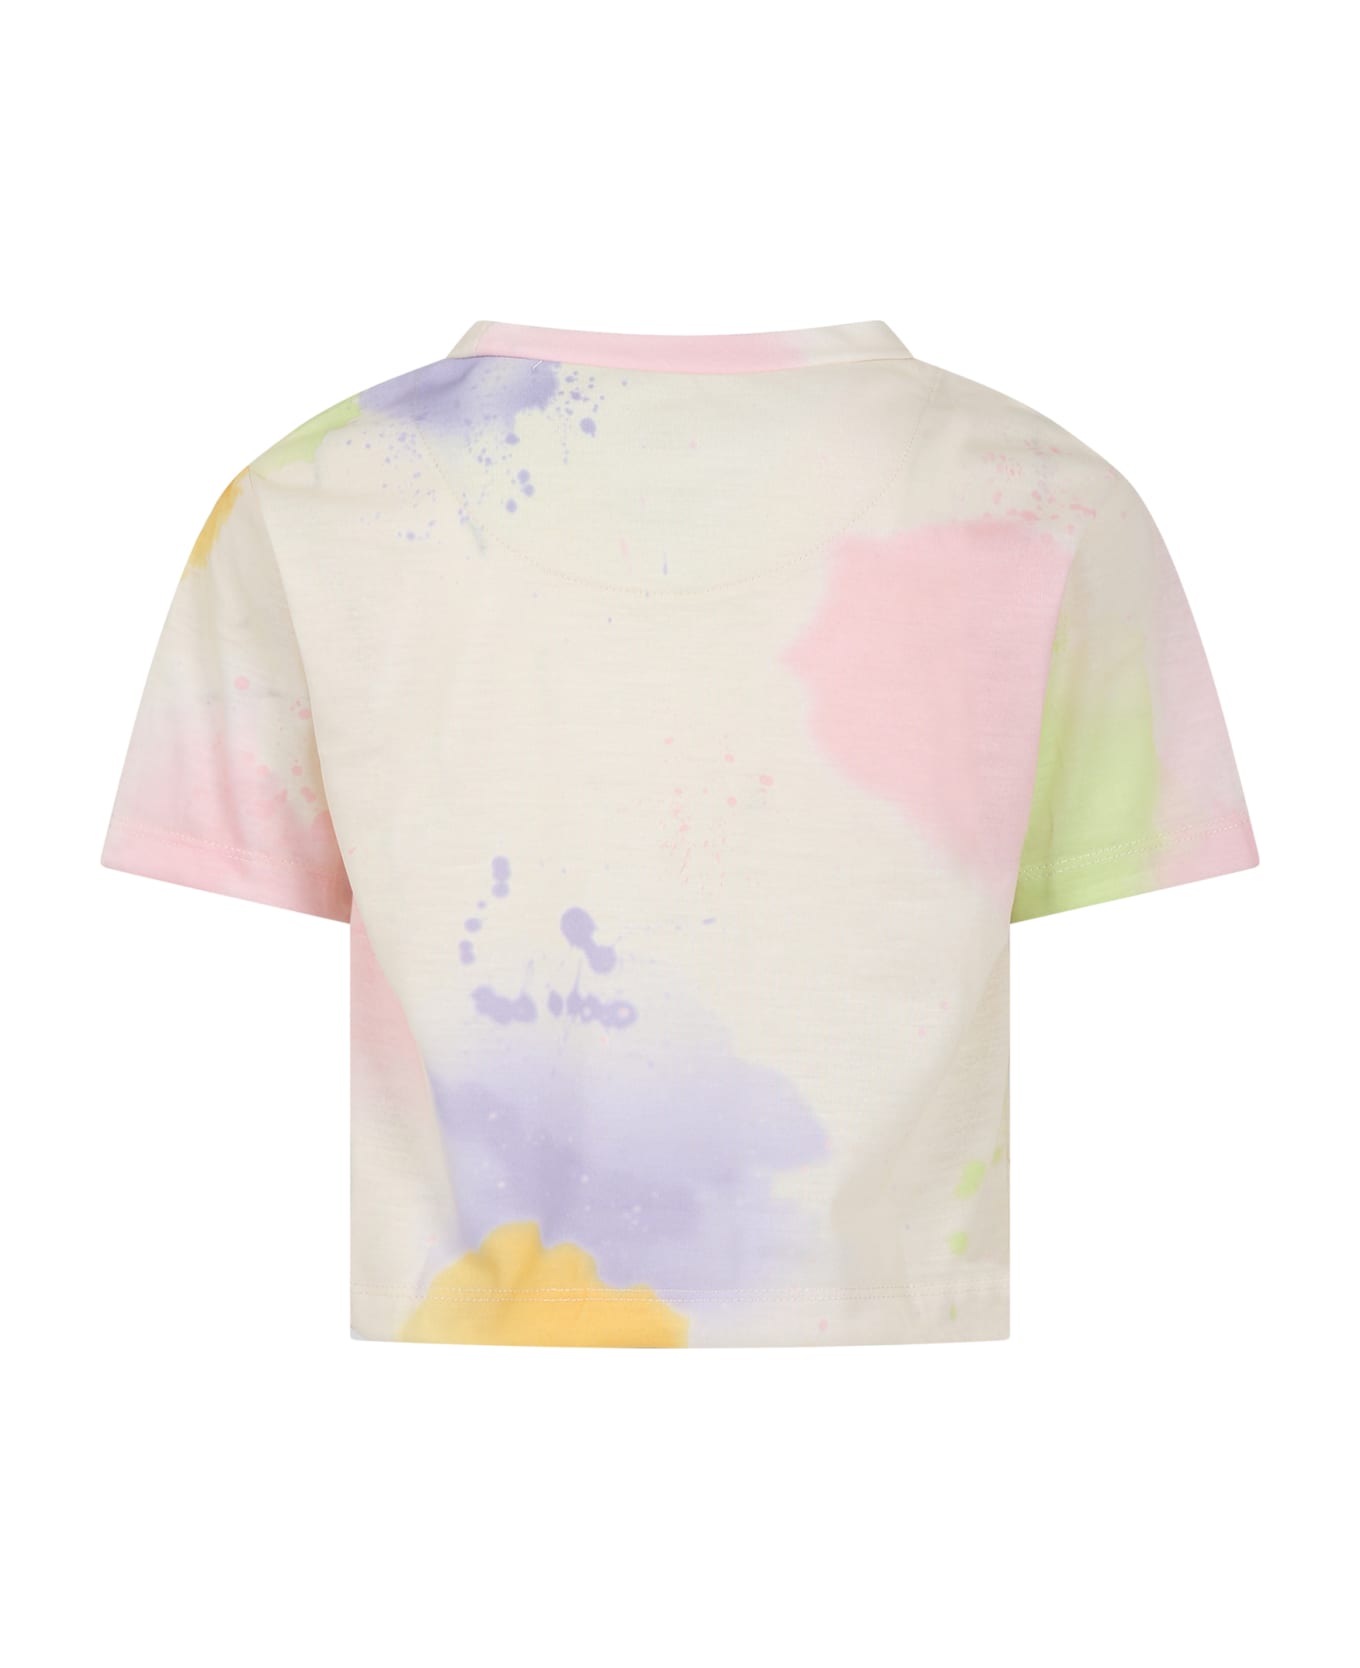 Nike Ivory T-shirt For Girl With Iconic Swoosh - Multicolor